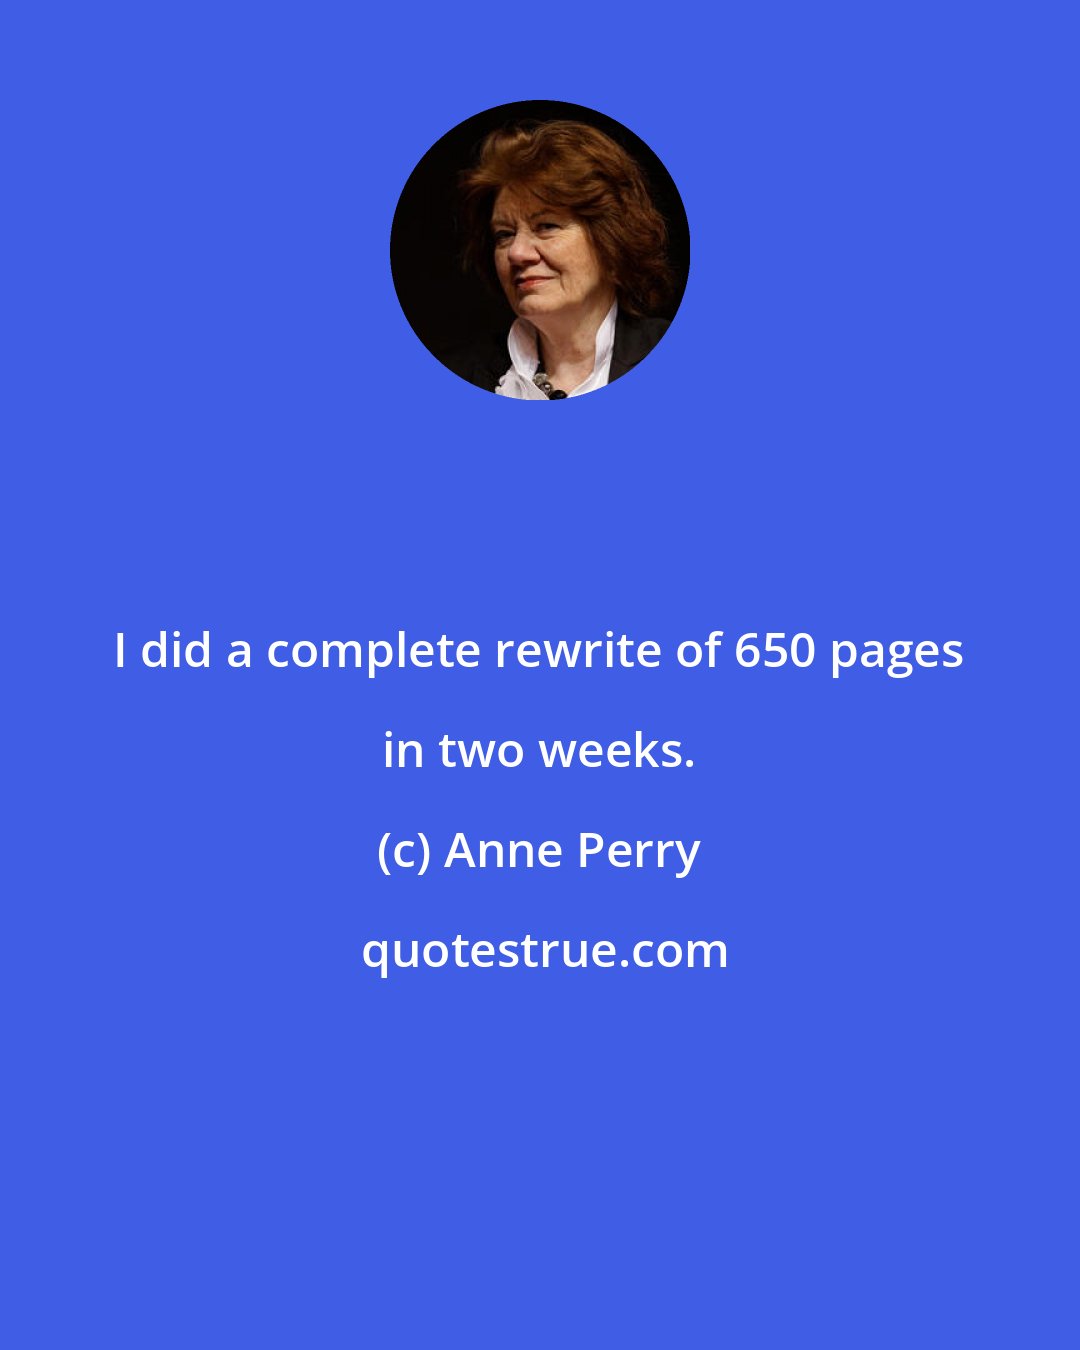 Anne Perry: I did a complete rewrite of 650 pages in two weeks.